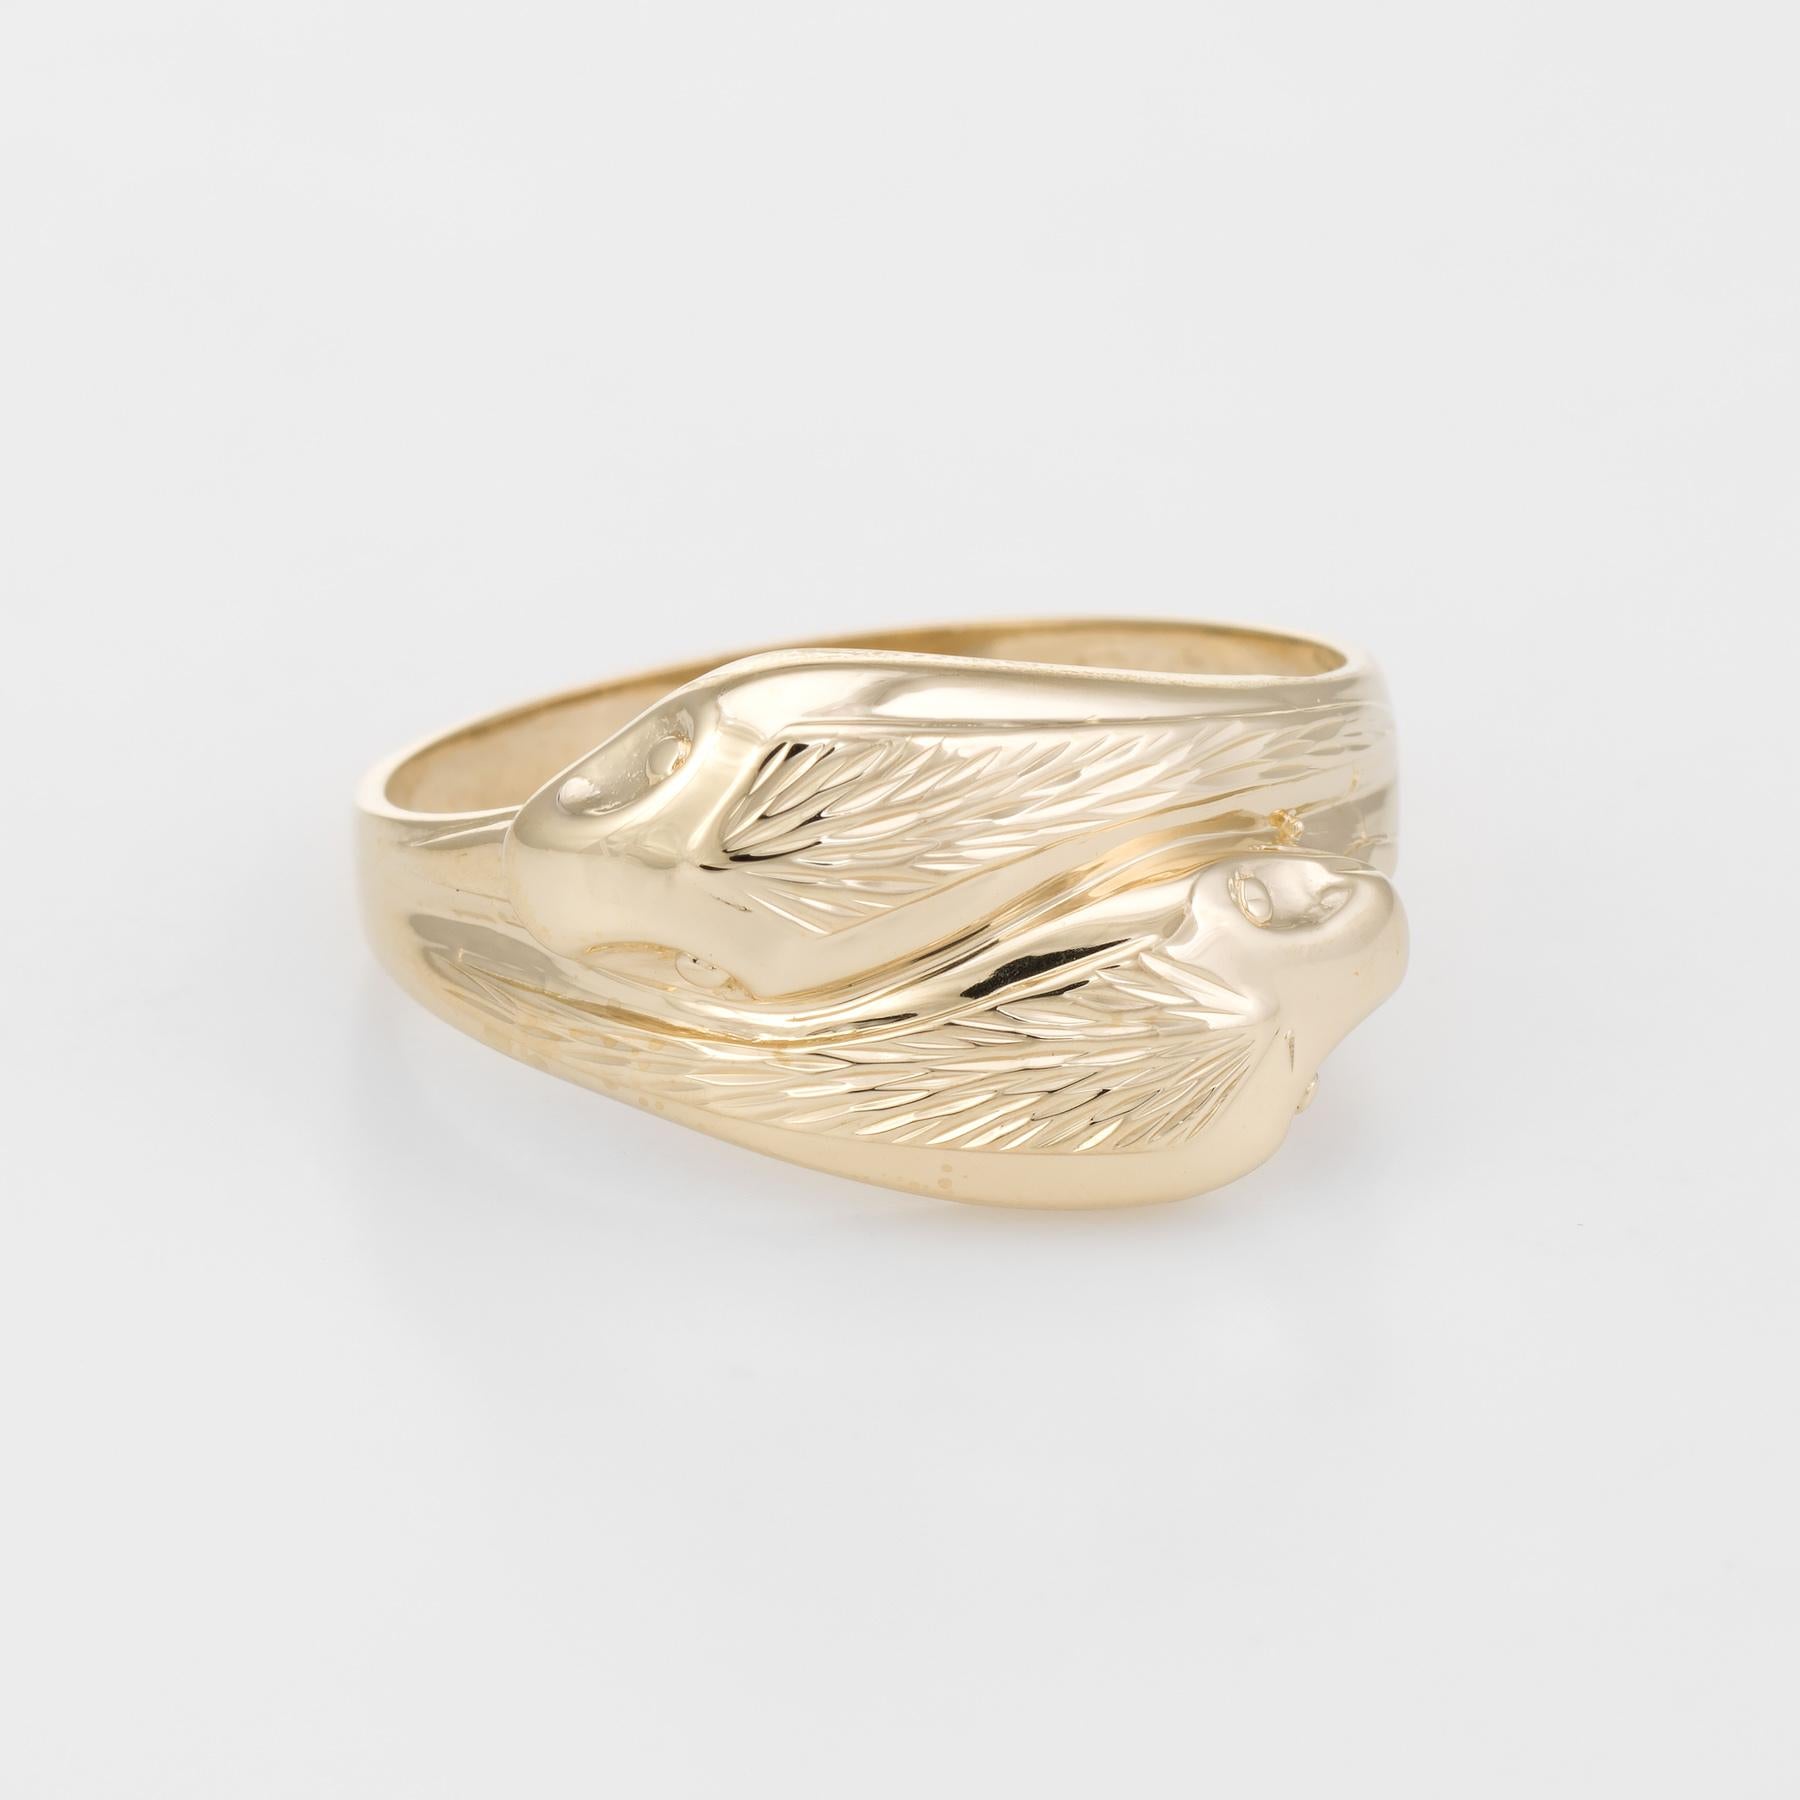 Finely detailed vintage double headed snake ring, crafted in 9 karat yellow gold. 

For centuries the snake has represented eternal love and faithfulness. The ring is great for stacking (looks great worn on the pointer finger), alone or with your